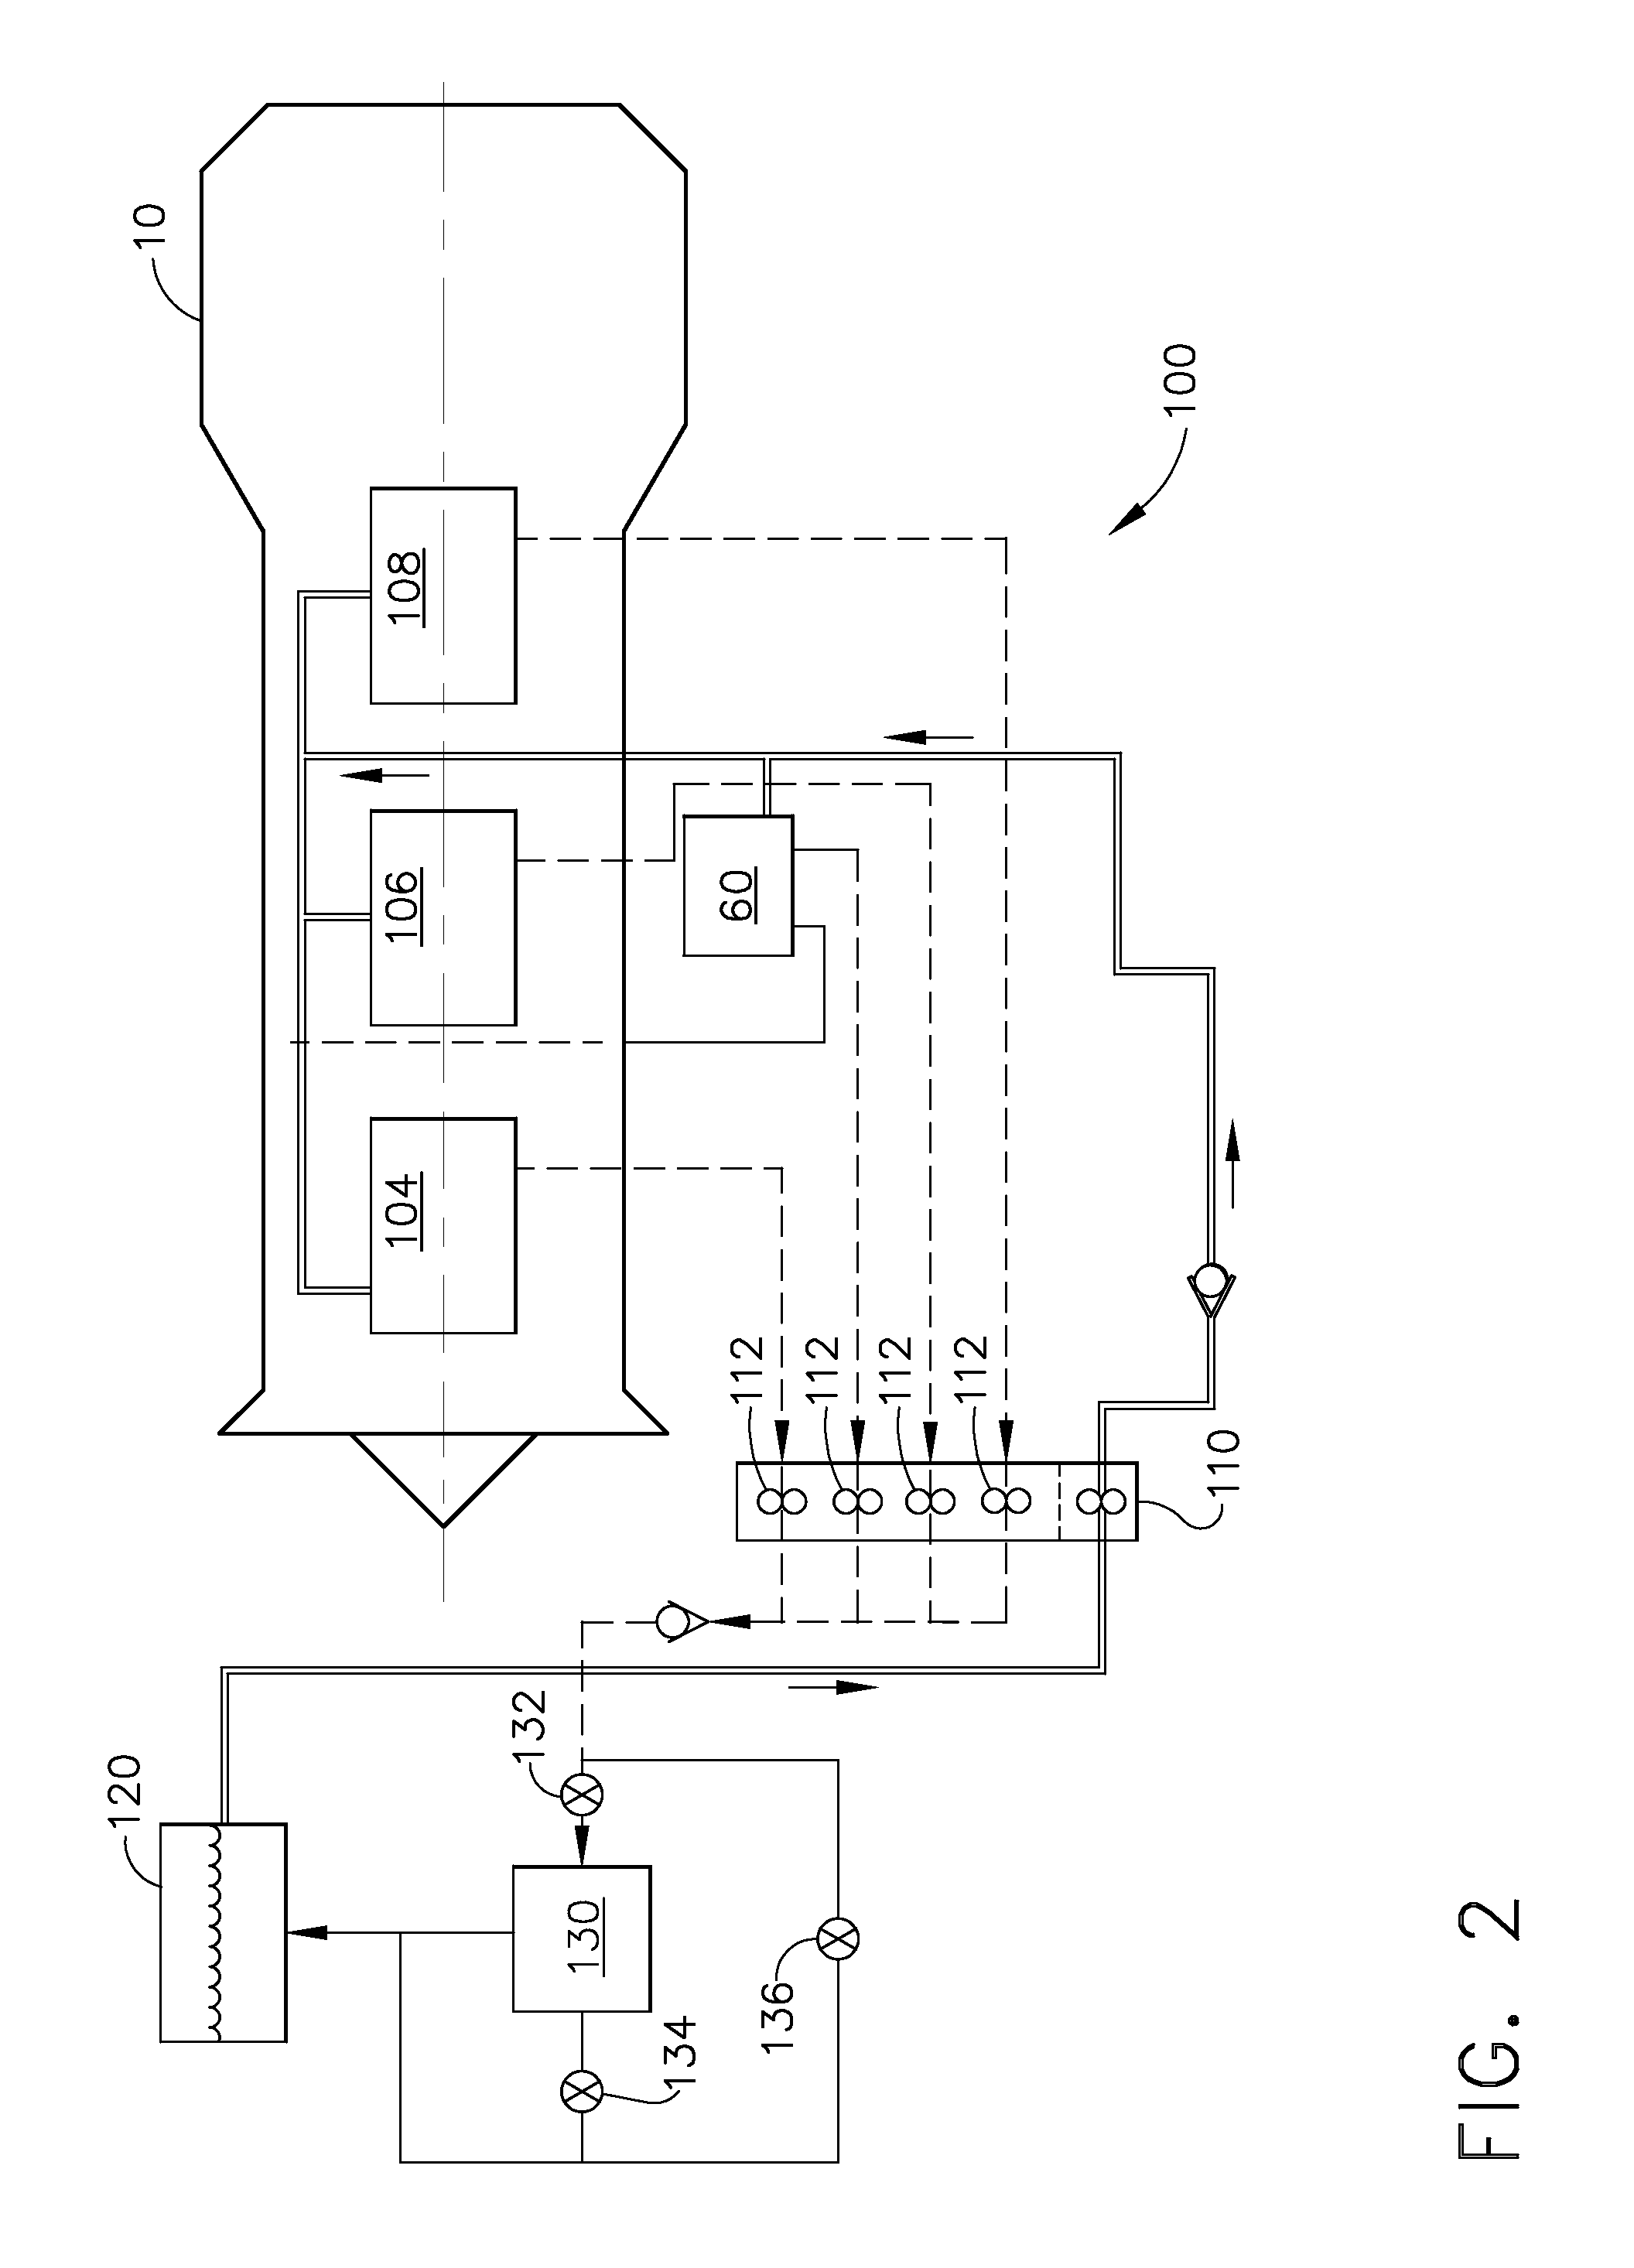 Method and apparatus for operating gas turbine engine heat exchangers